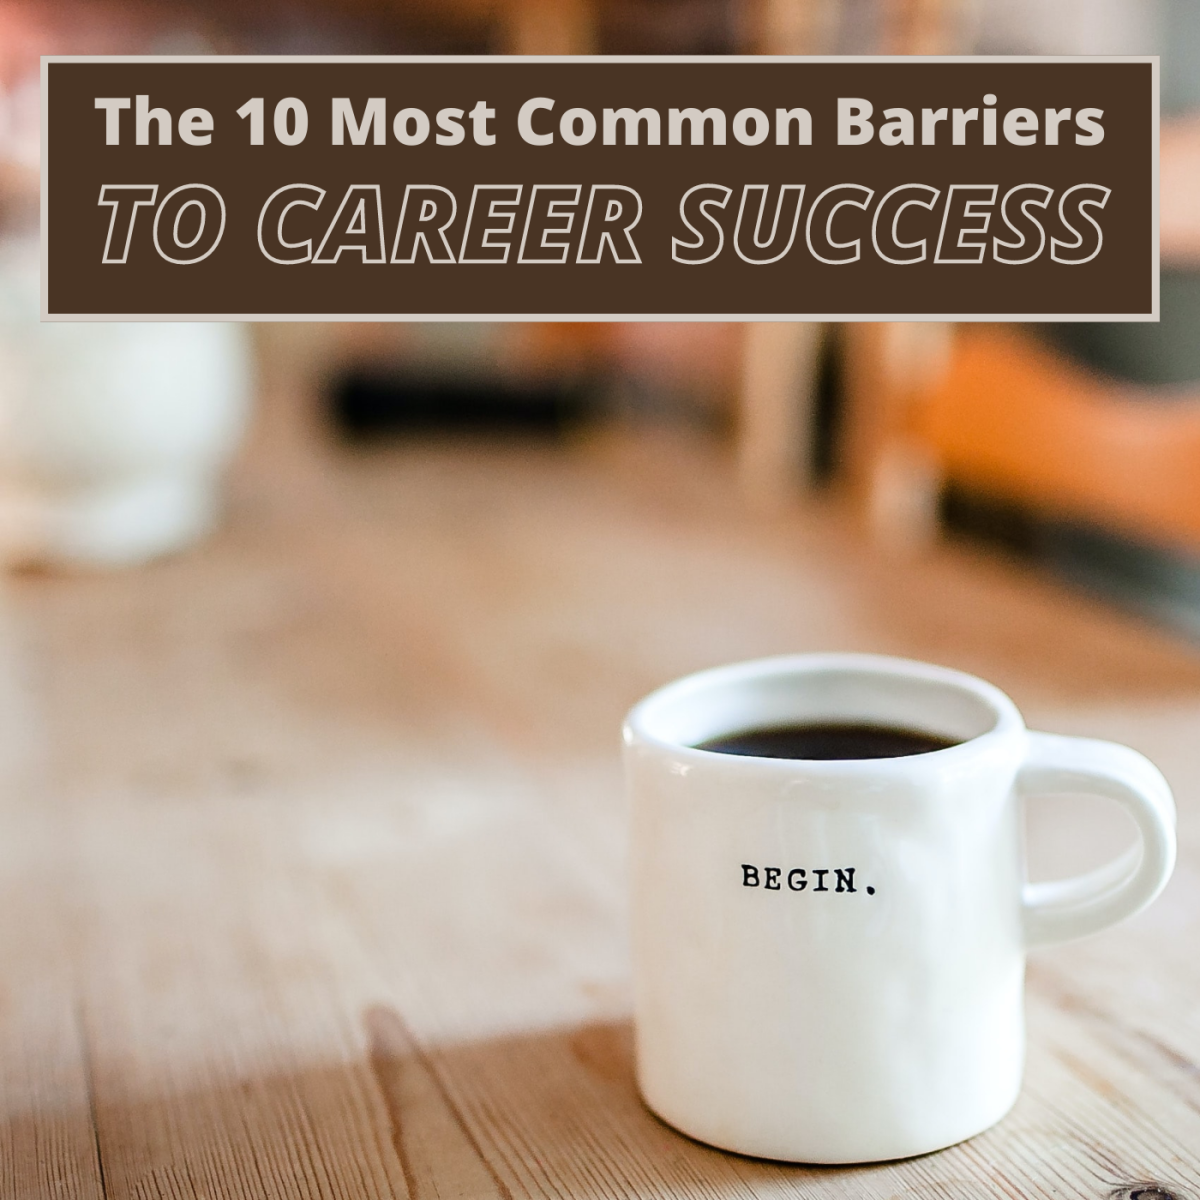 The Top 10 Reasons You Haven't Achieved Success at Work